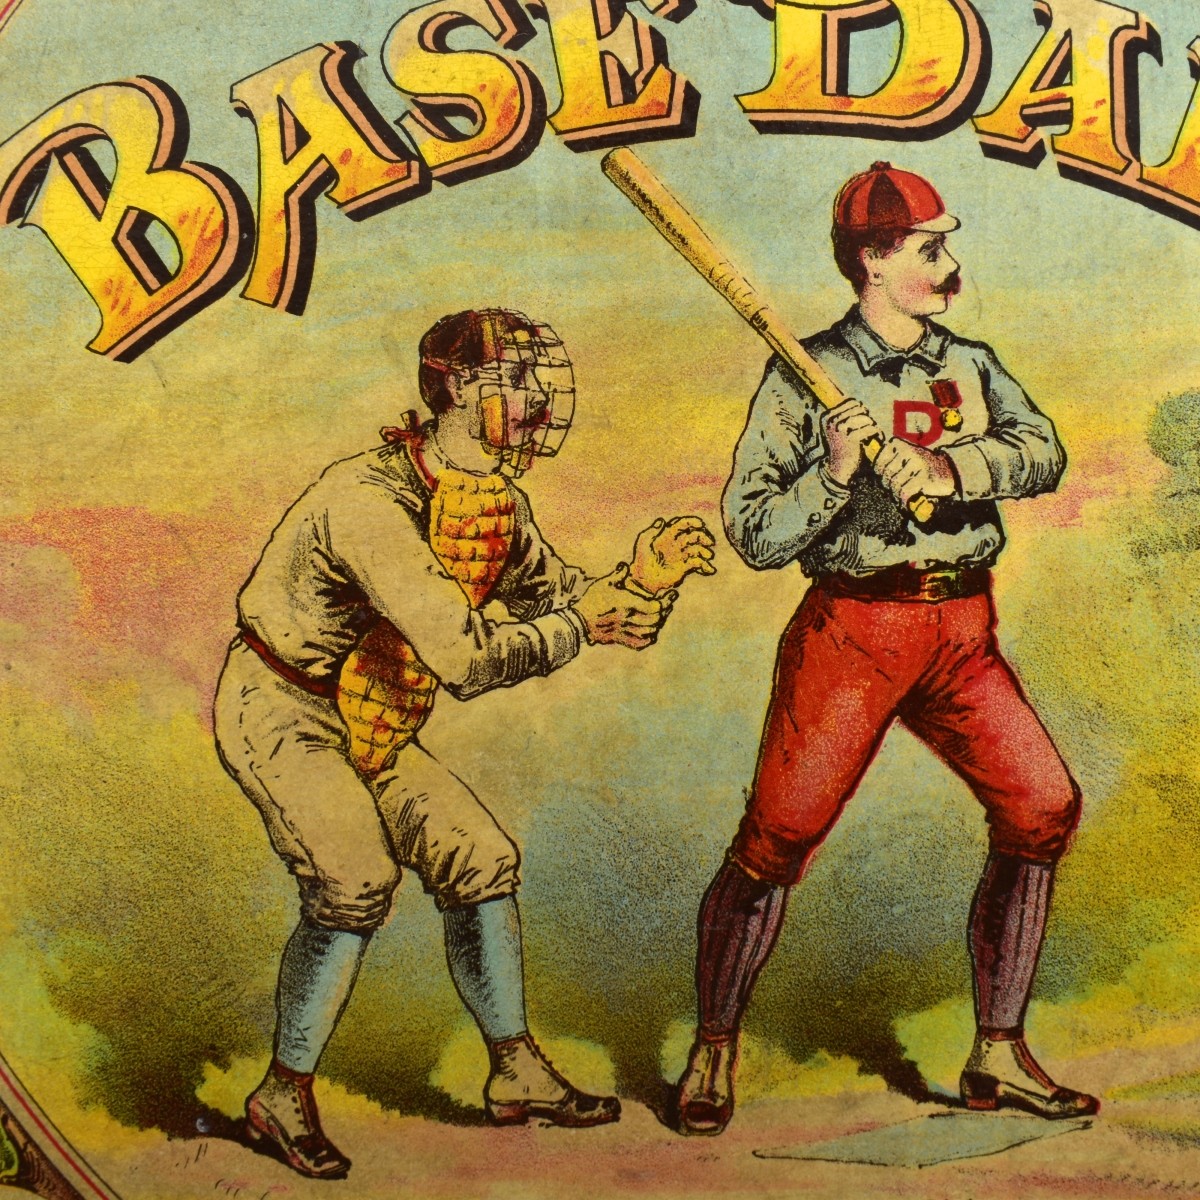 The Professional Game Of Base Ball Parker Bros.